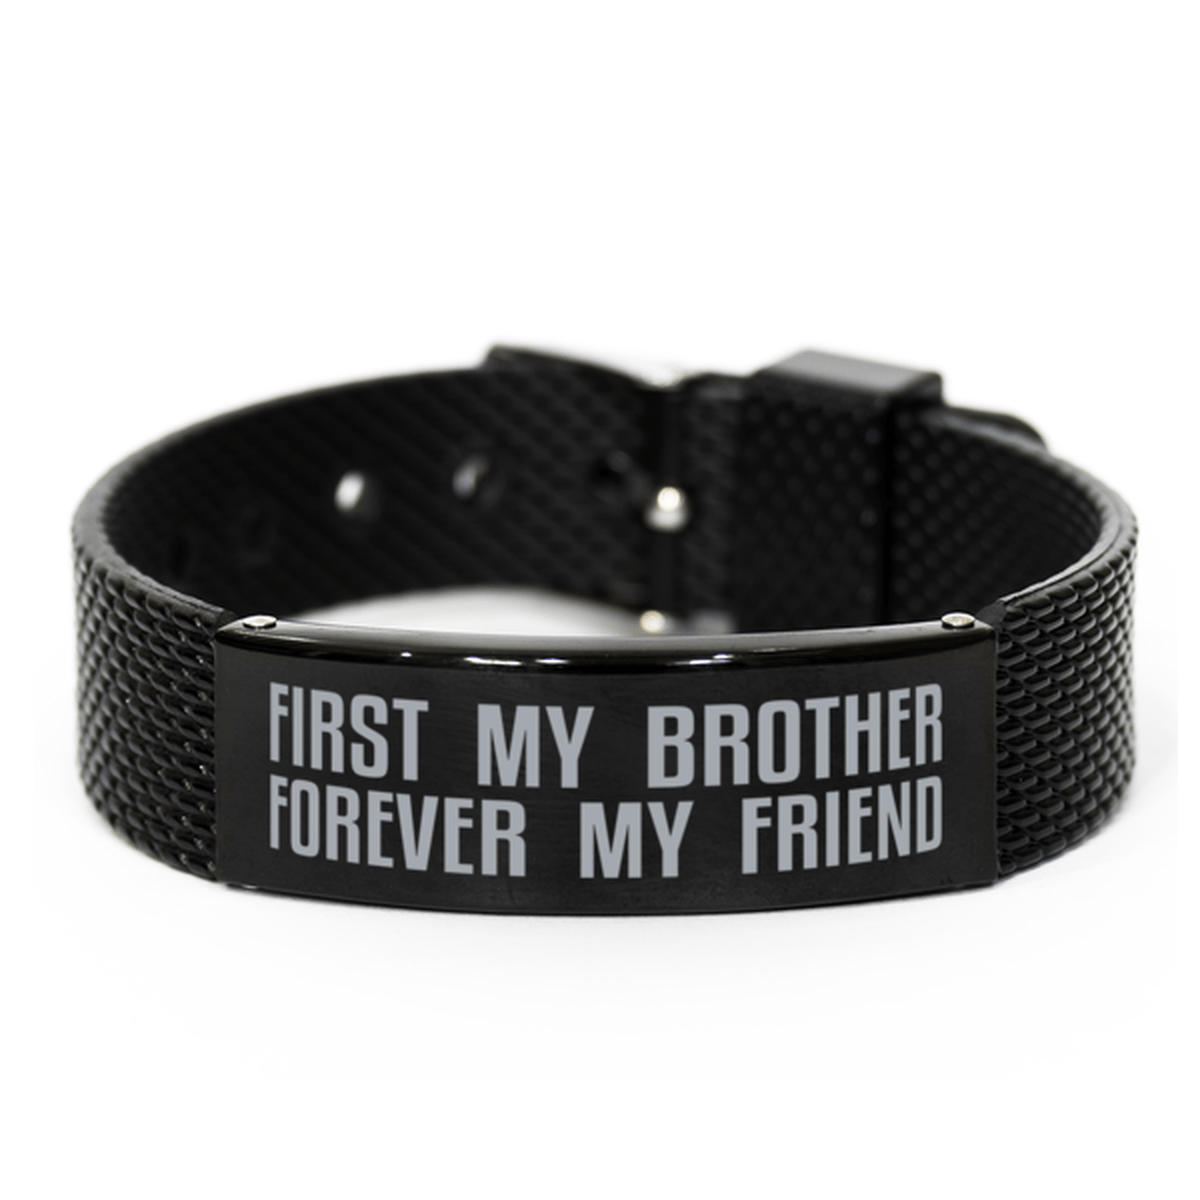 Unique Brother Black Shark Mesh Bracelet, First My Brother Forever My Friend, Best Gift for Brother Birthday, Christmas